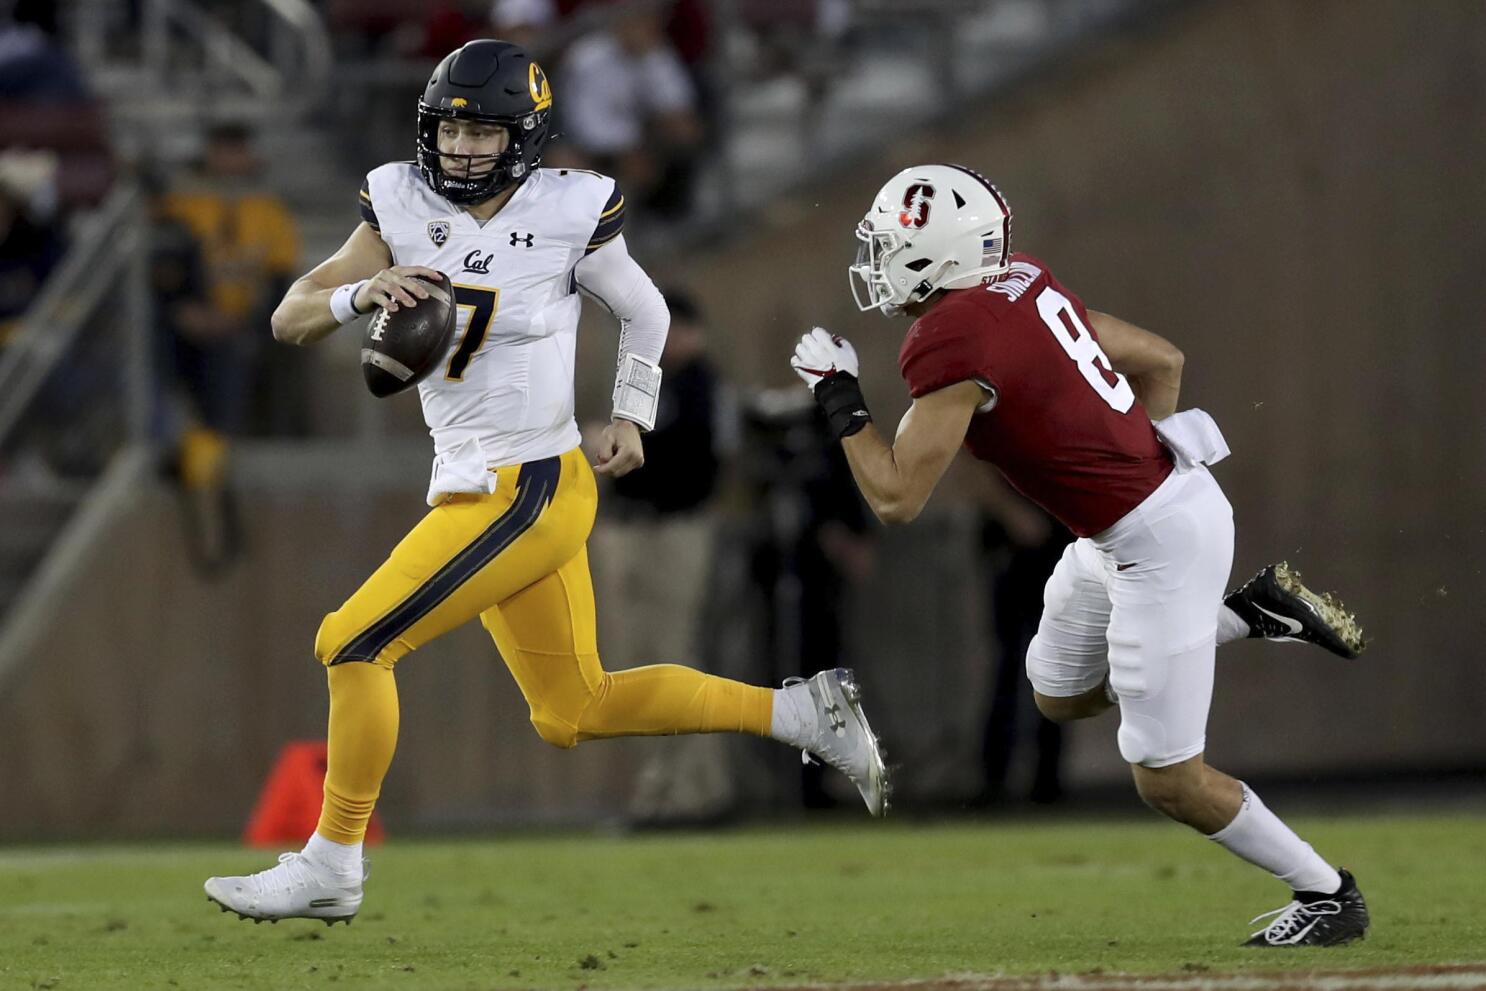 USC-Cal game postponed over Bears' positive COVID tests